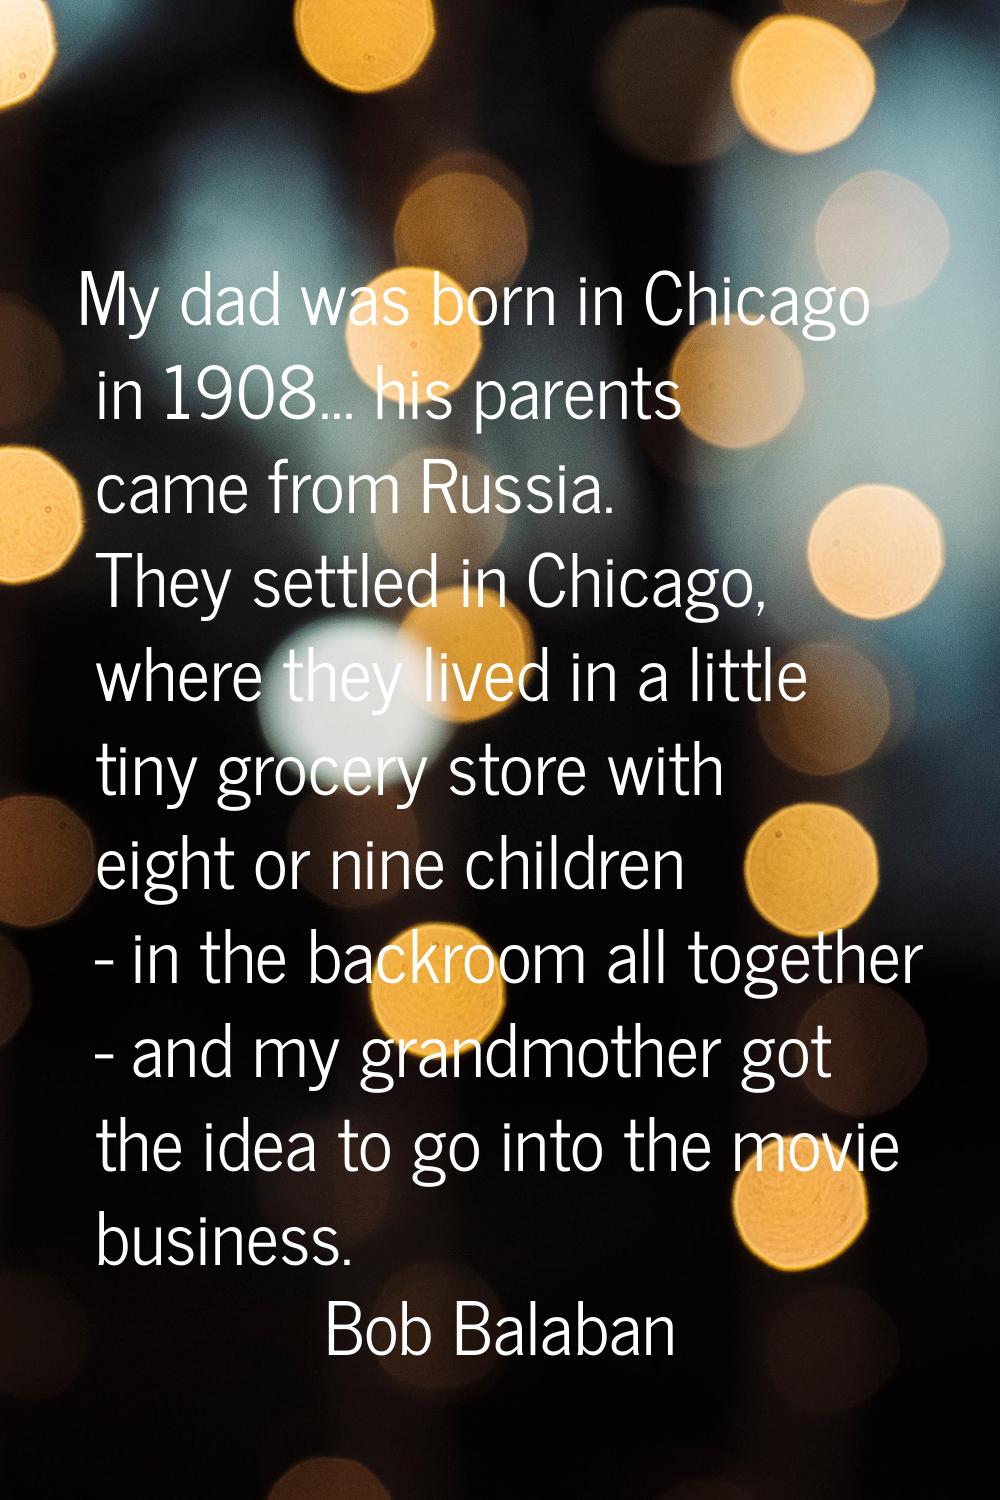 My dad was born in Chicago in 1908... his parents came from Russia. They settled in Chicago, where 